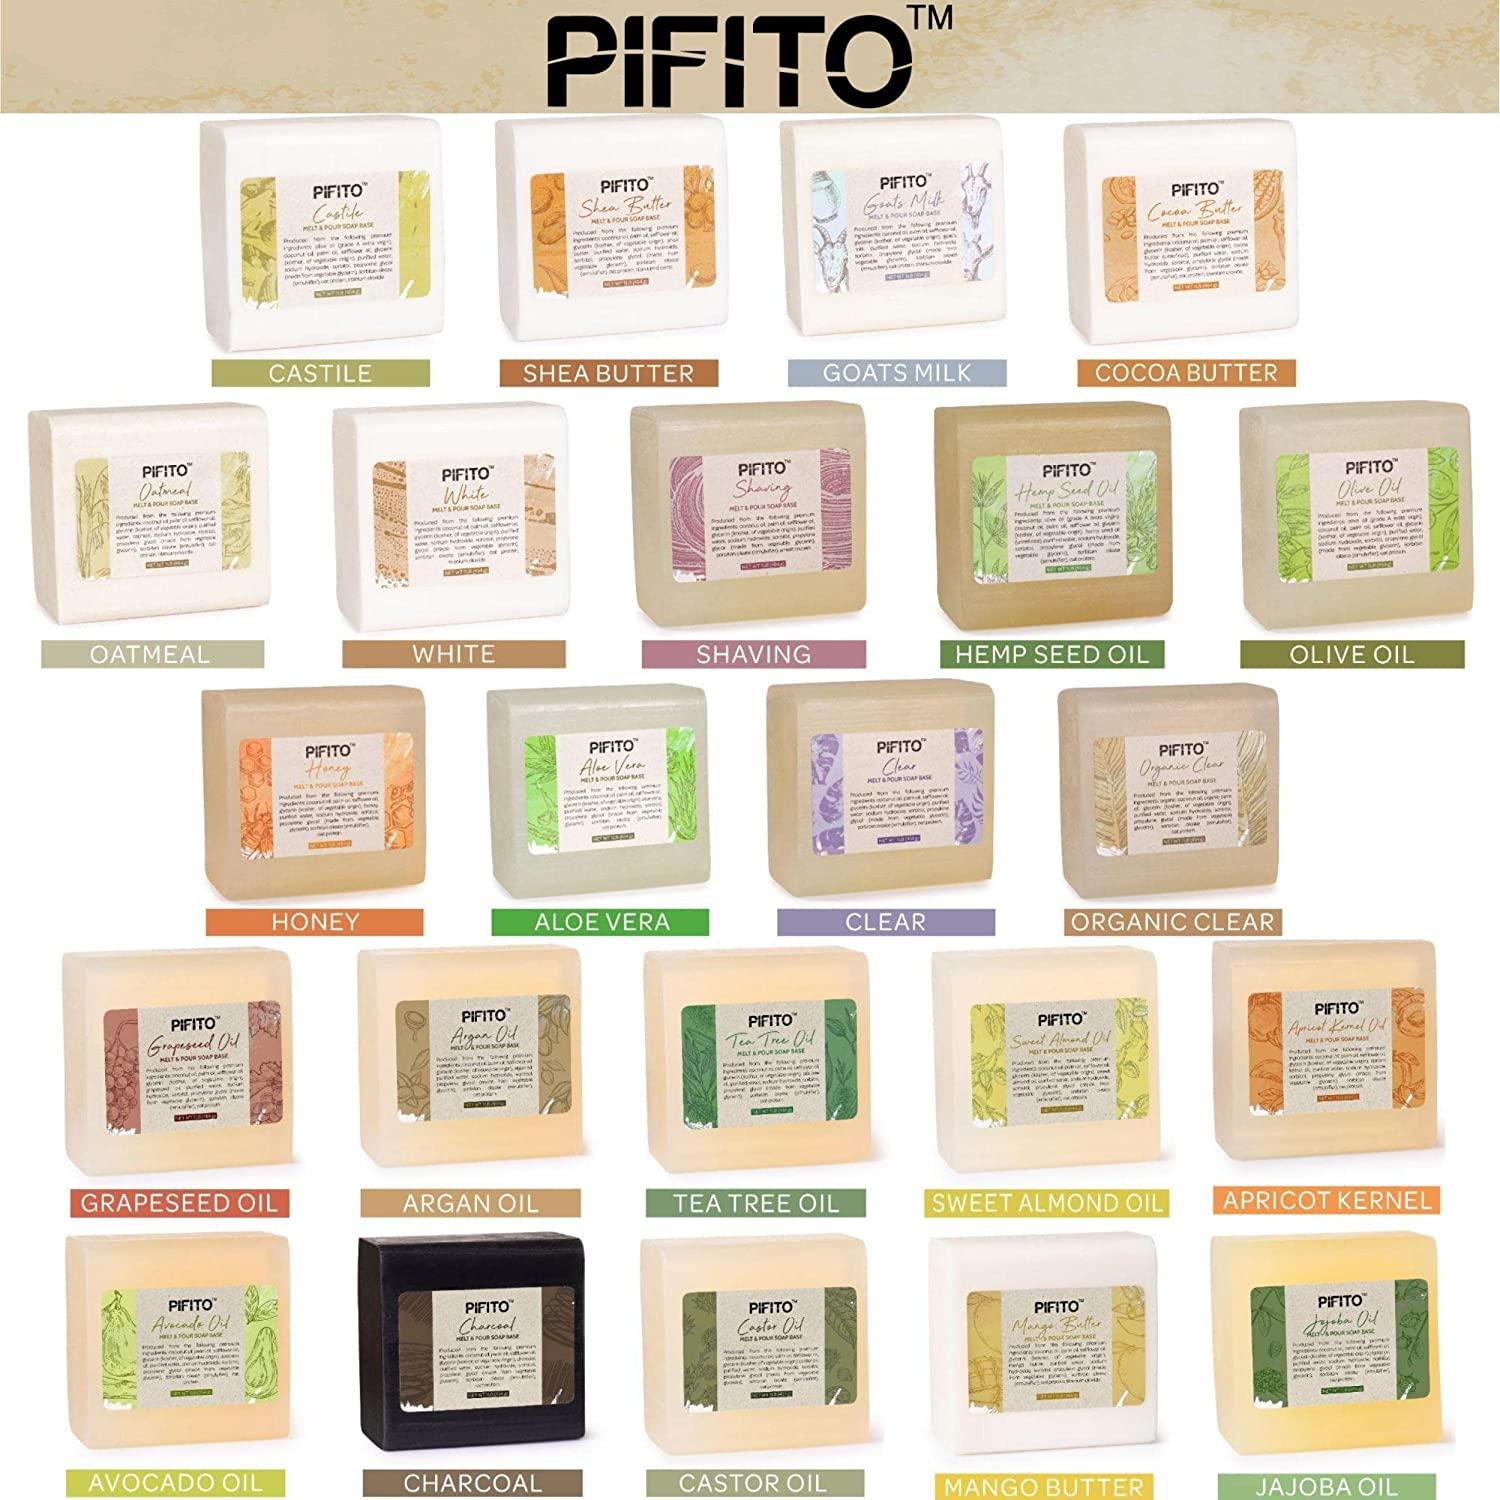 Pifito Clear Melt and Pour Soap Base (5 lb) - Luxurious Soap Supplies